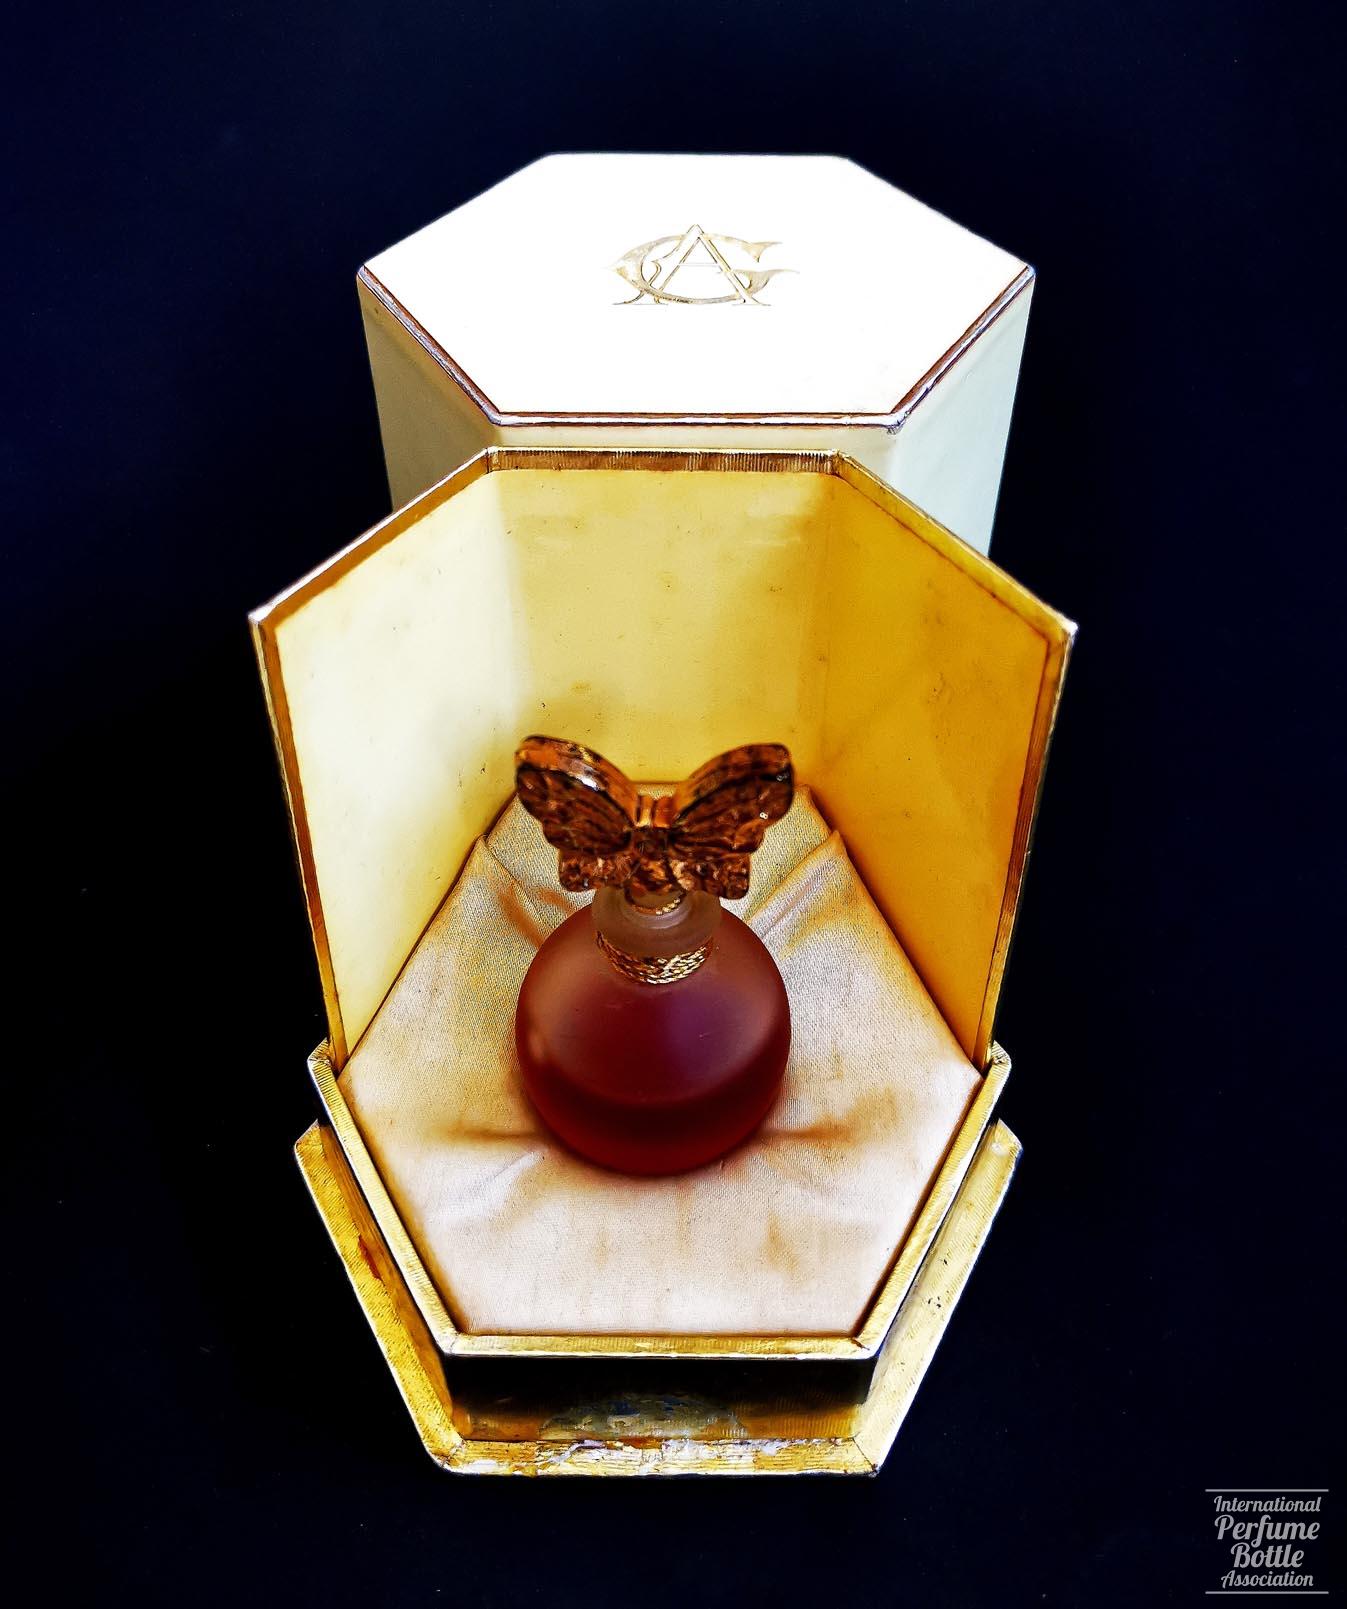 "Heure Exquise" by Annick Goutal